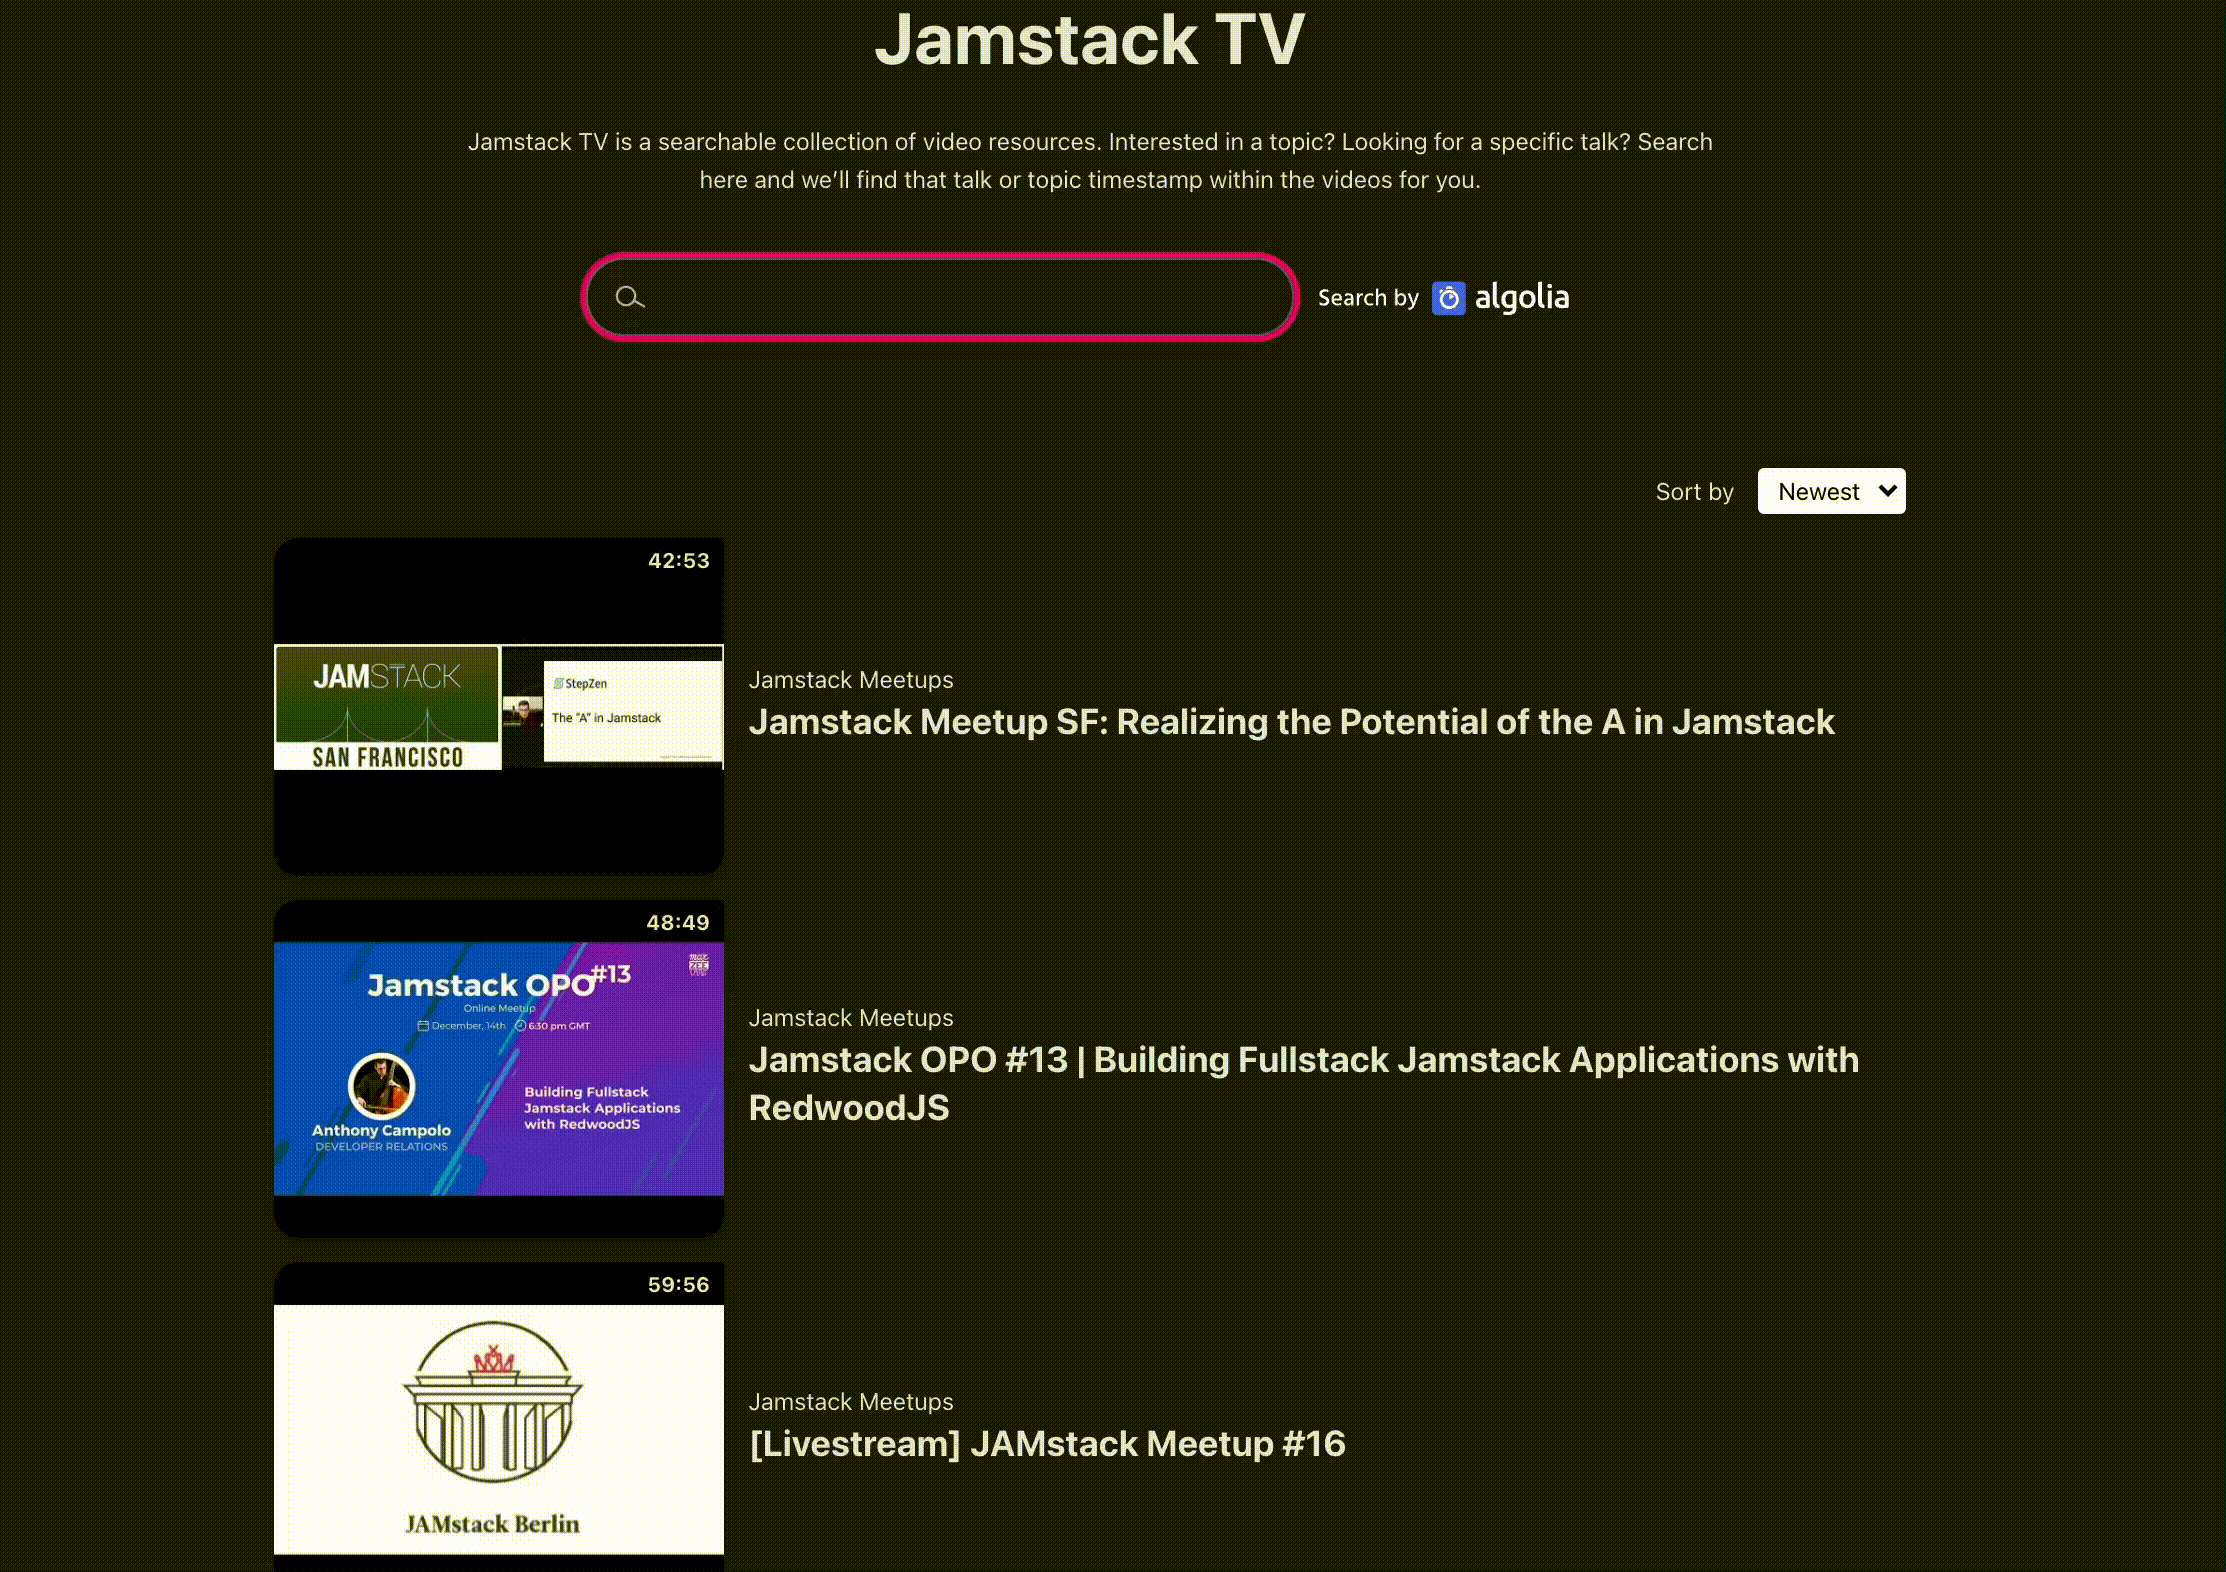 Search Jamstack TV captions with Algolia Talksearch